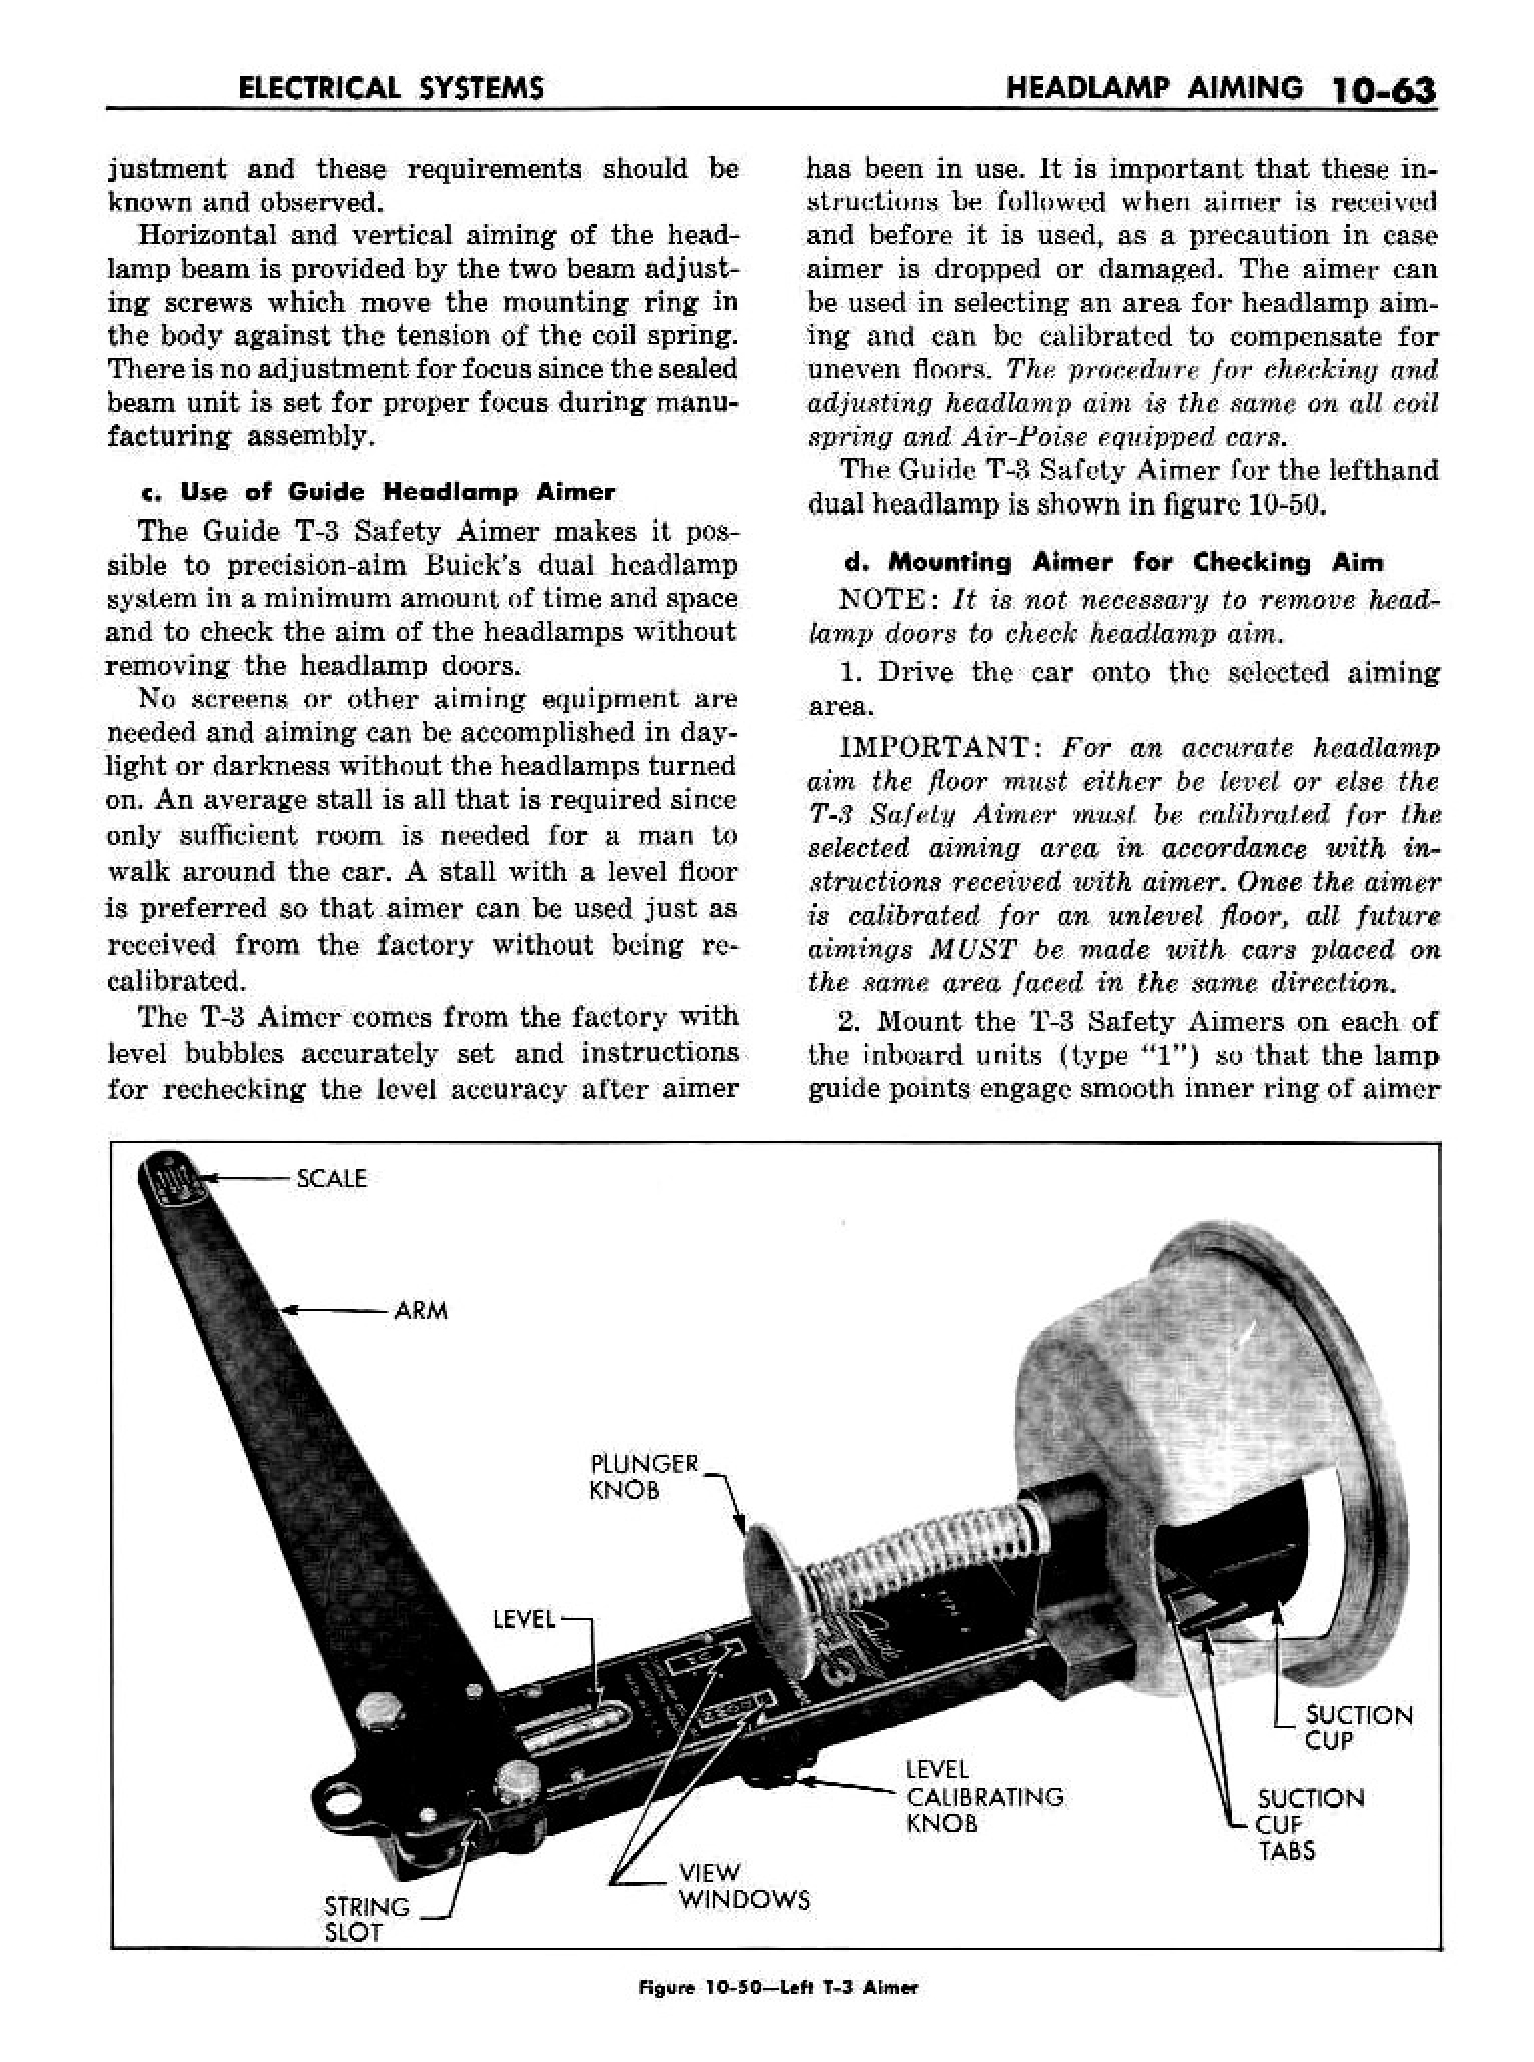 n_11 1958 Buick Shop Manual - Electrical Systems_63.jpg